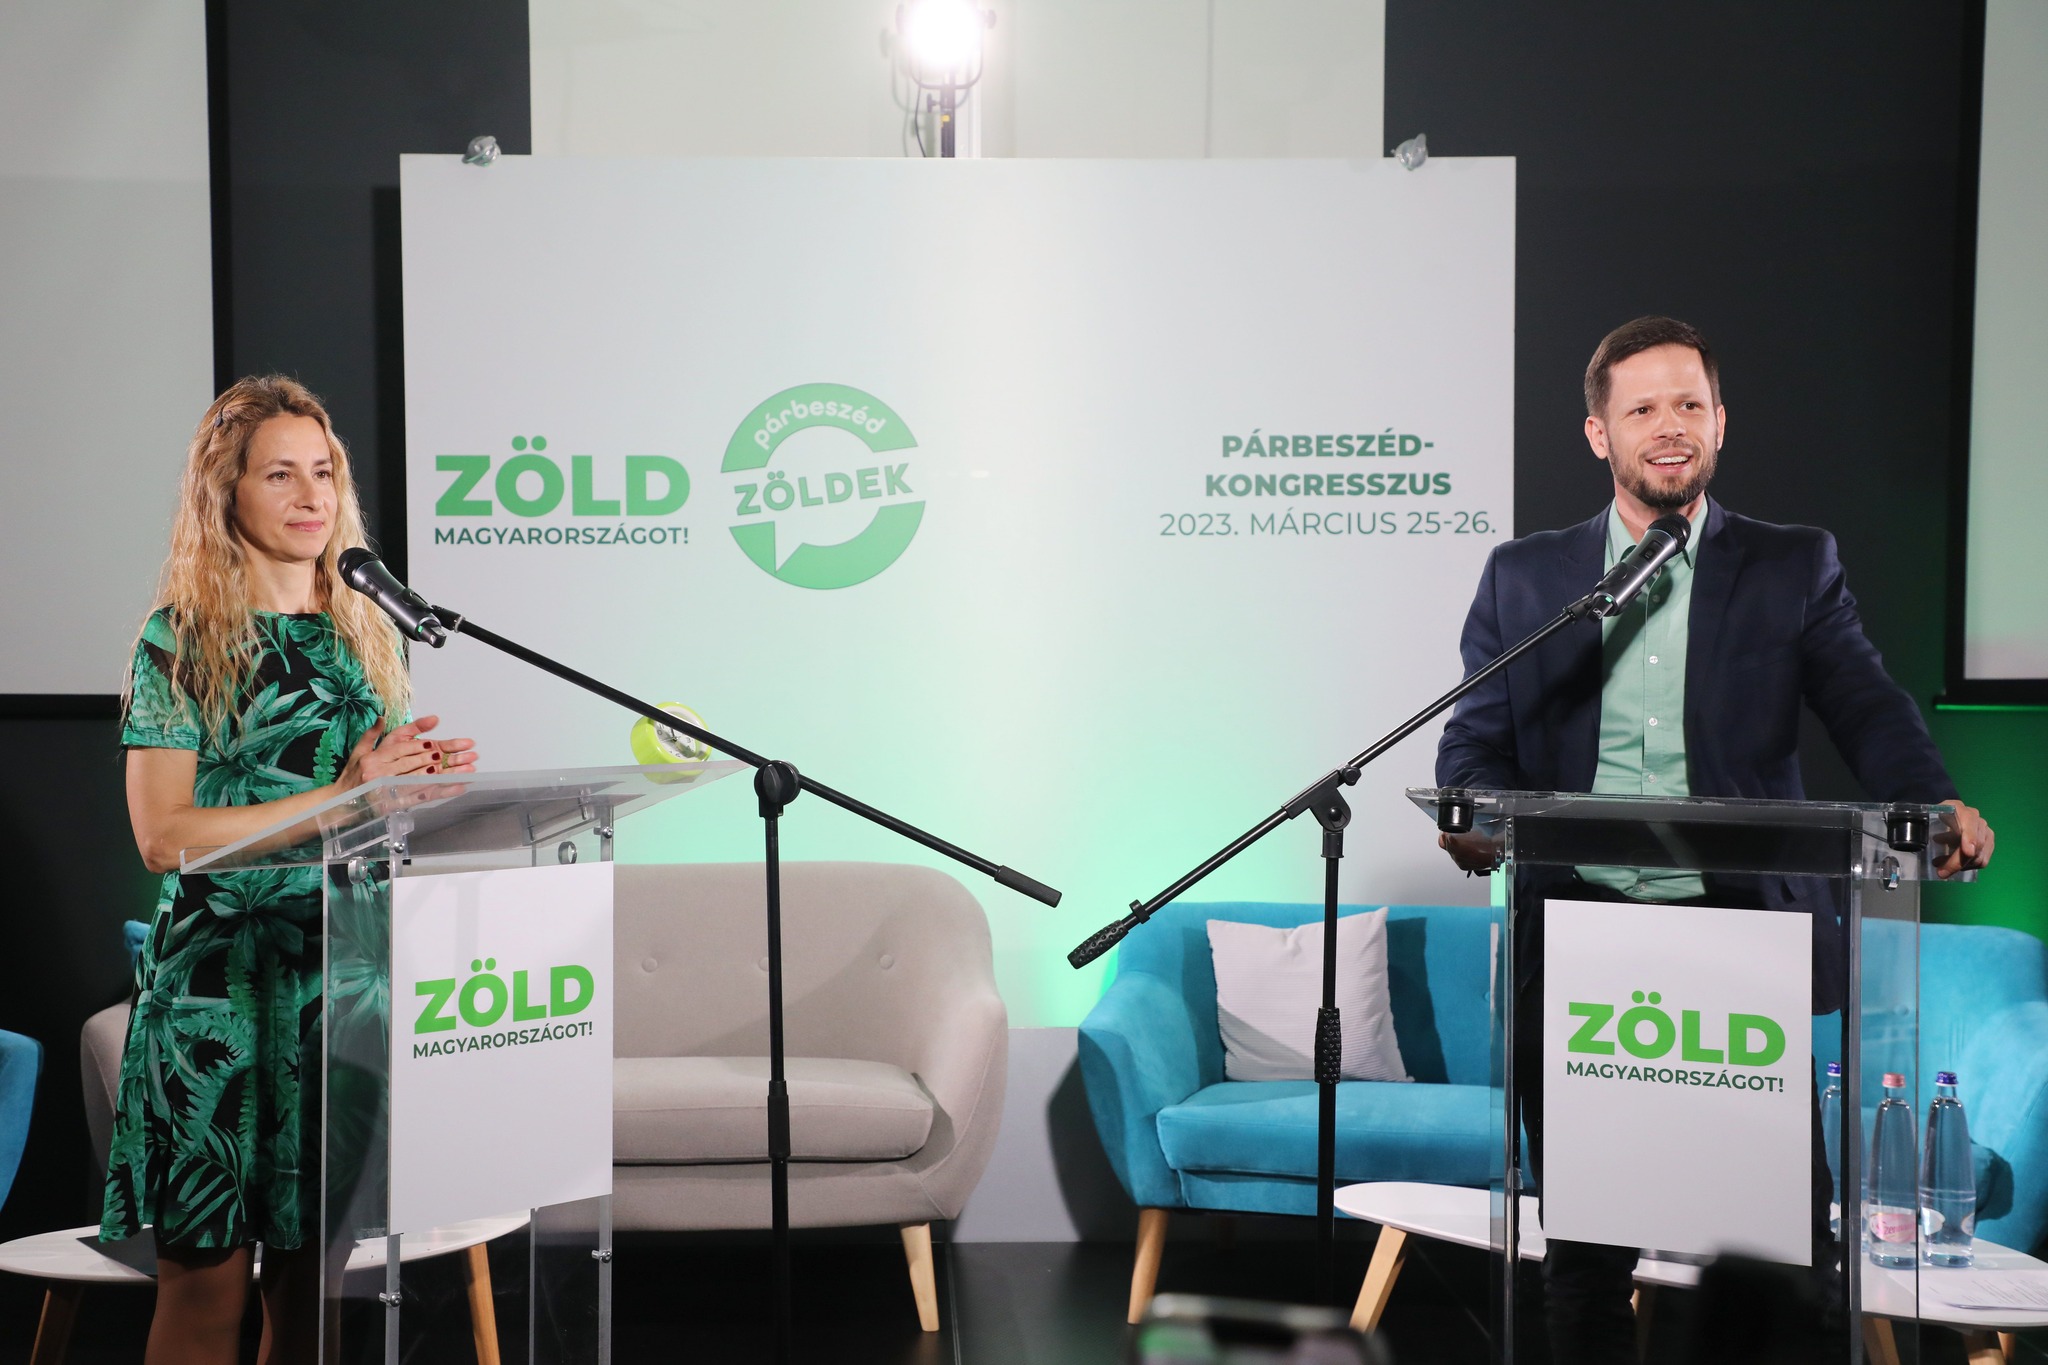 Going Green: Hungarian Opposition Party Párbeszéd Changes Name